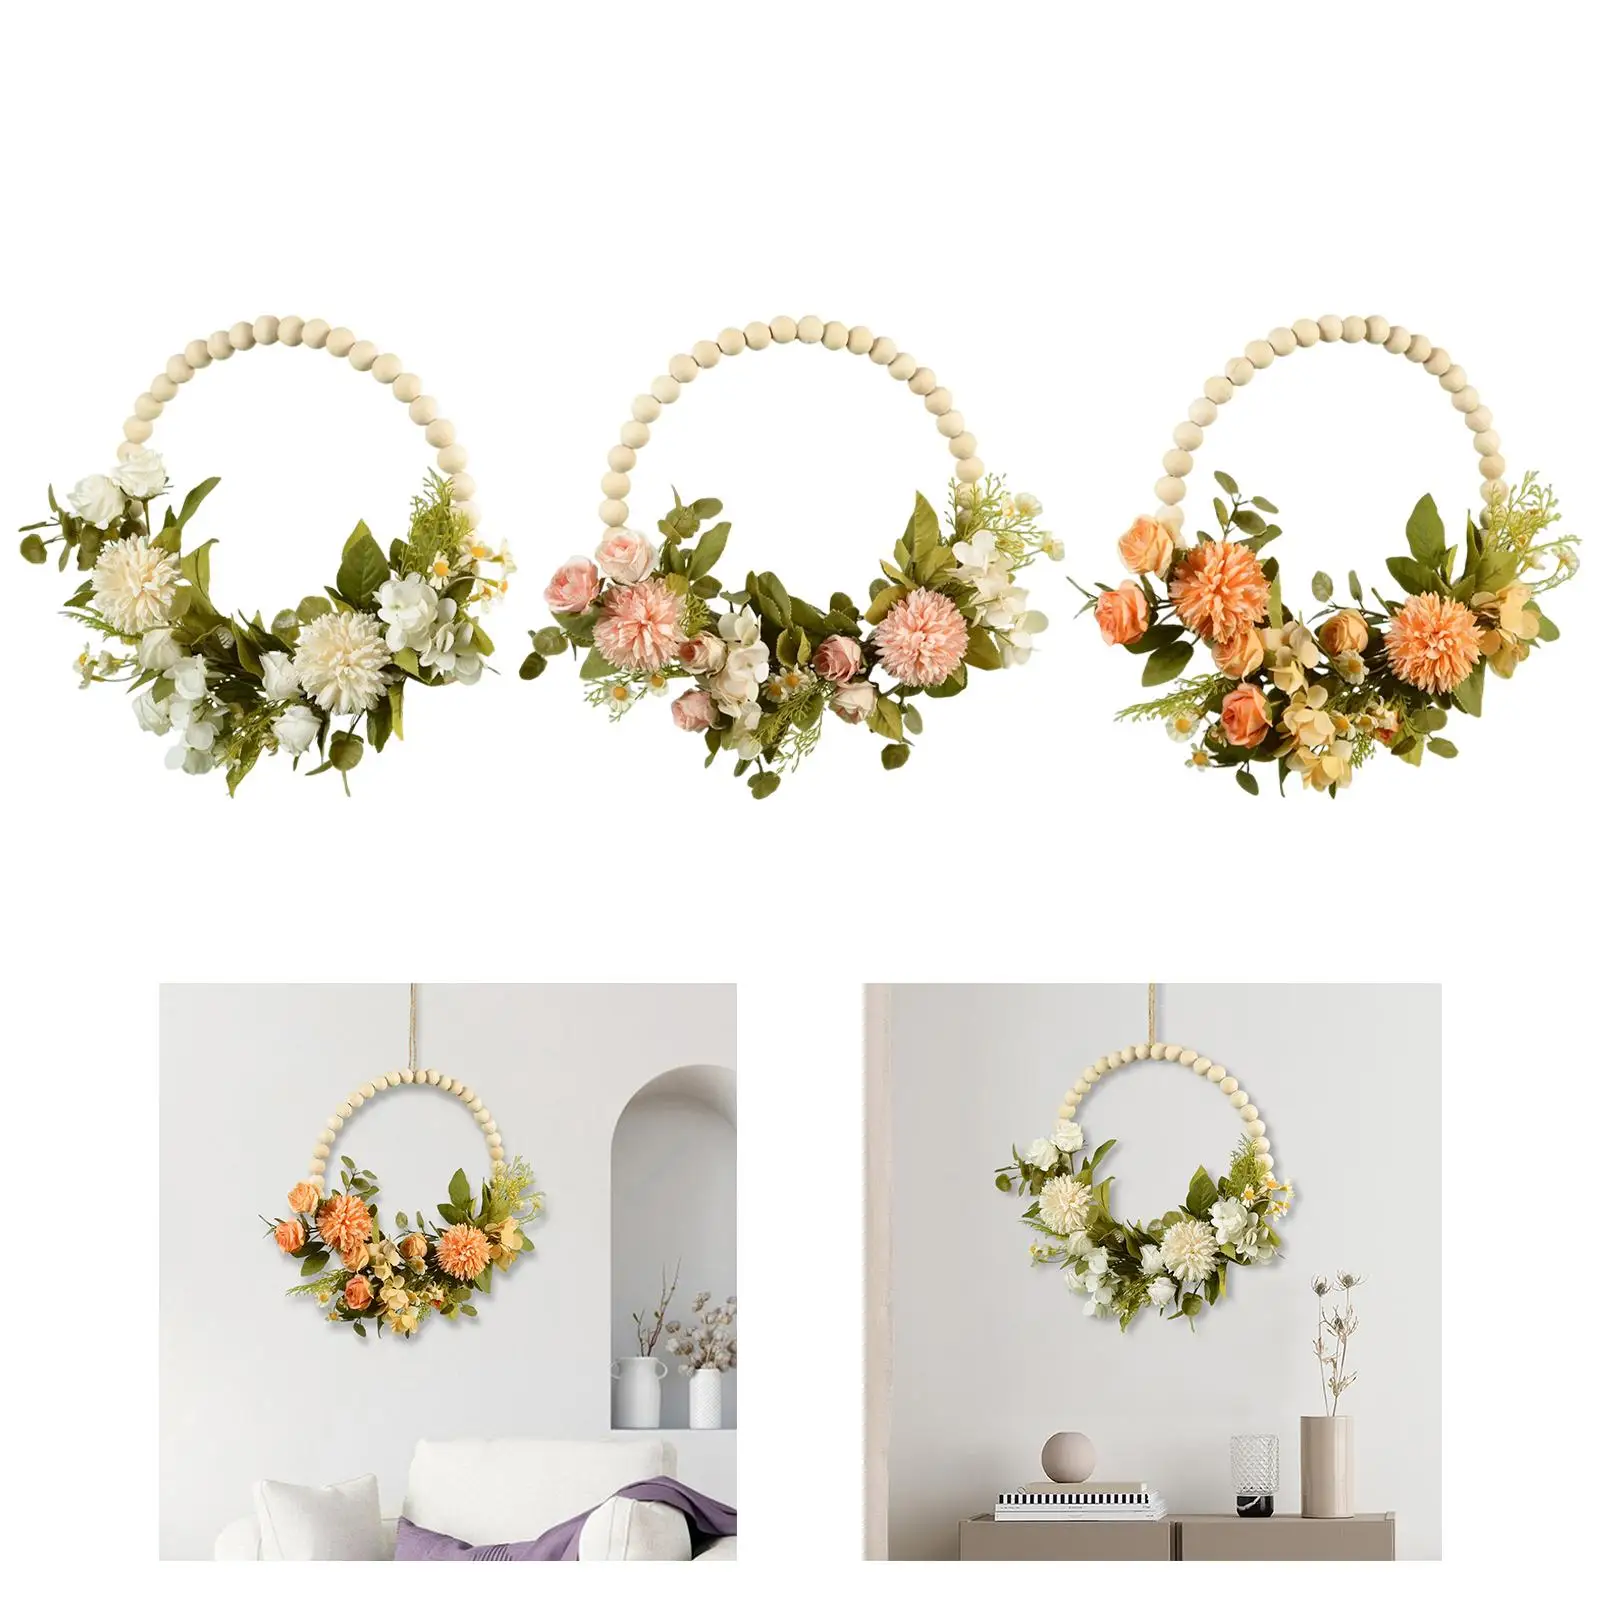 Artificial Flower Wreath Garland Wood Beads Hoop Green Leaves Wall for Home Farmhouse Wedding Party Decoration Ornament